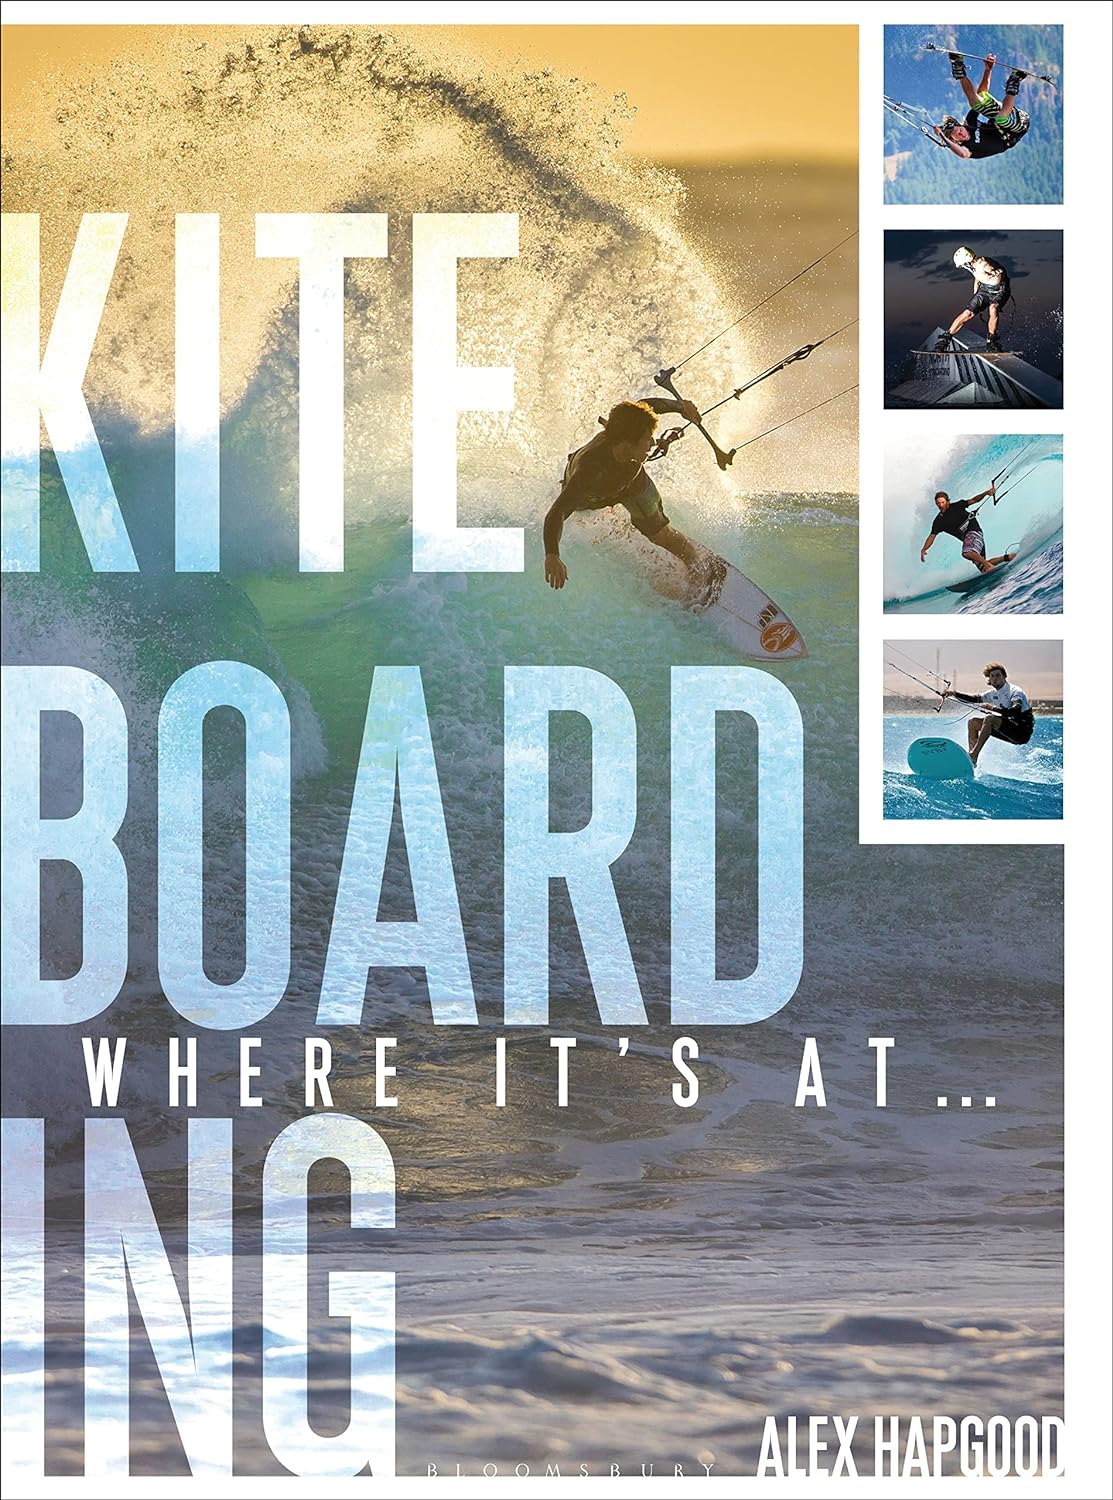 Book- Alex Hapgood Kiteboarding Where Its At Paperback